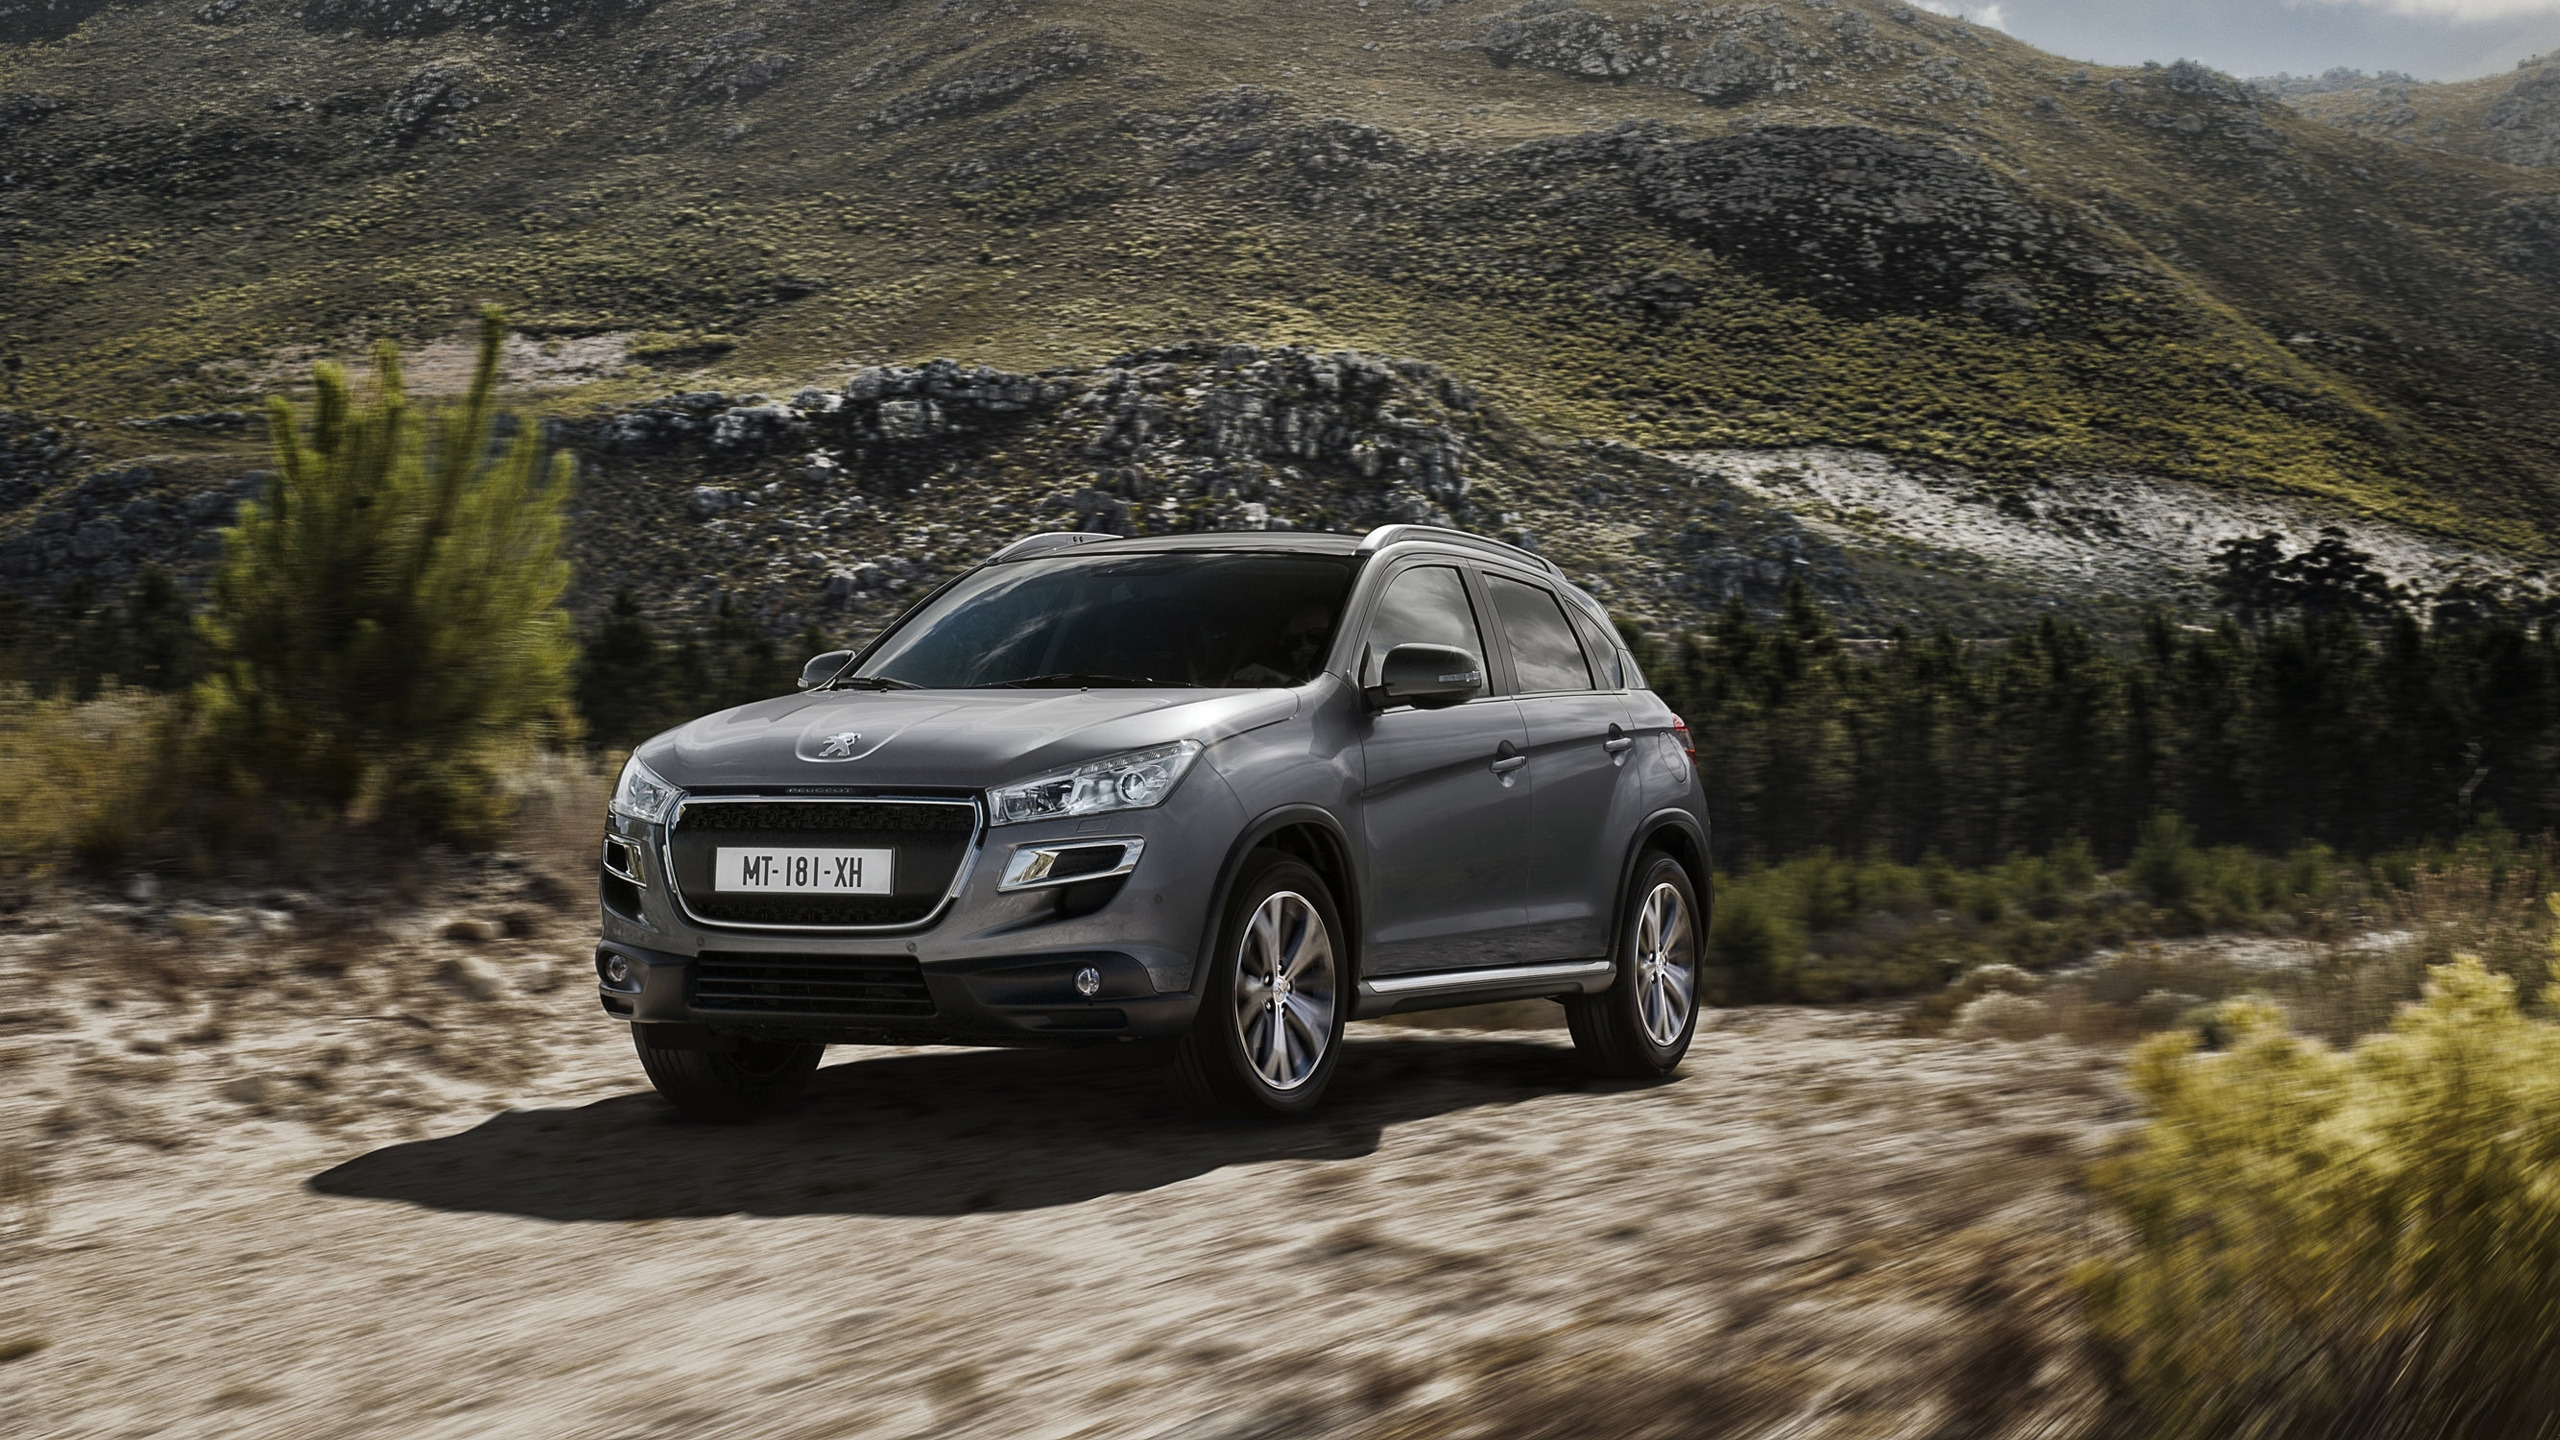 Beautiful Peugeot 4008 4x4 for 2560x1440 HDTV resolution